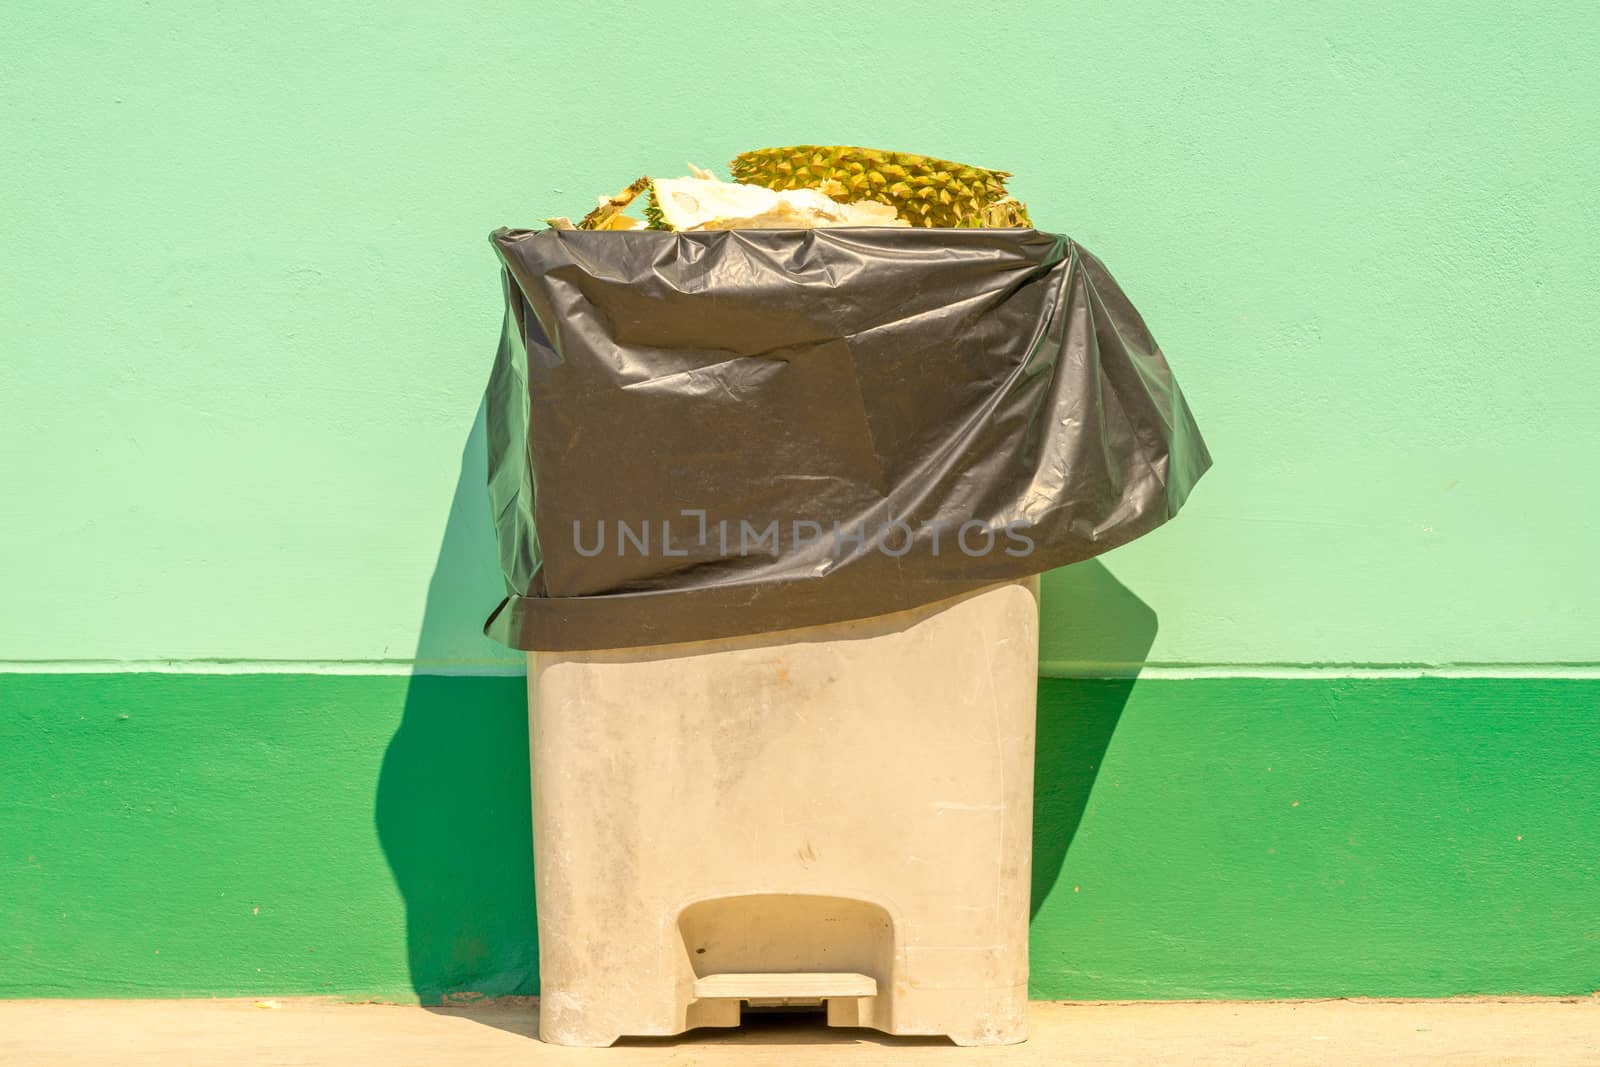 Discard durian peel in trash. Pastel green background